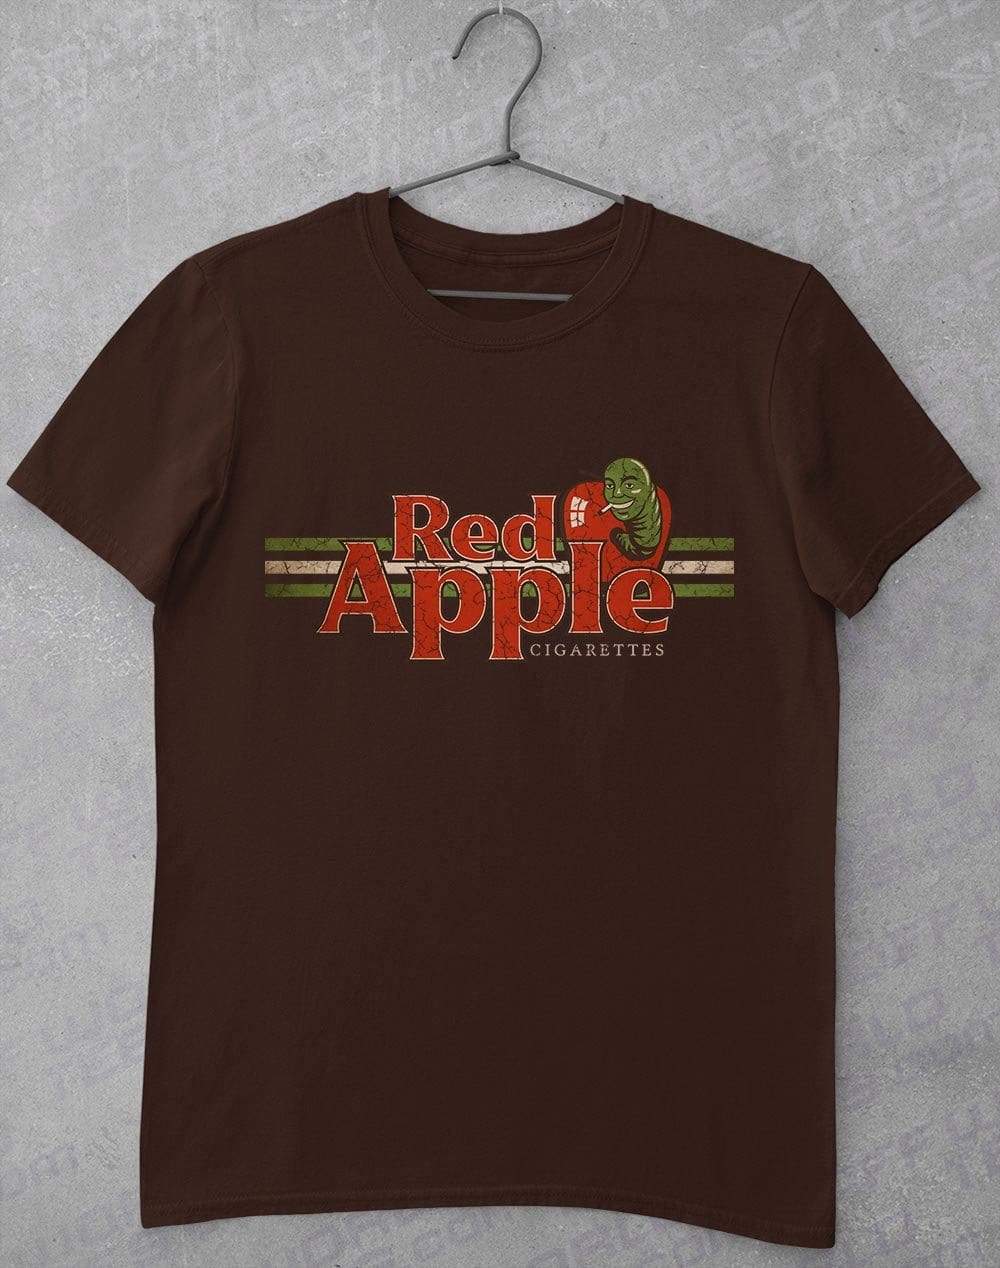 Red Apple Cigarettes T-Shirt S / Dark Chocolate  - Off World Tees